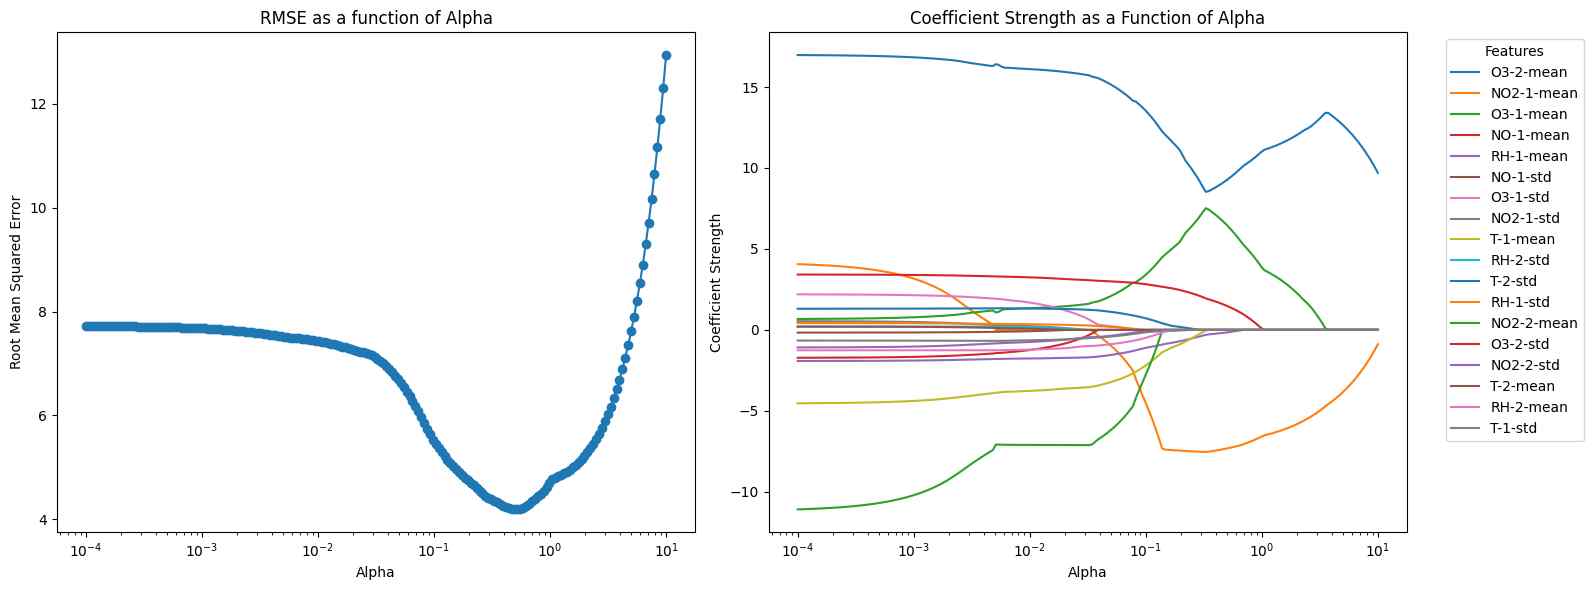 Optimizing alpha in Lasso regression to minimize RMSE. The graphs shows the RMSE and coefficient strength as a function of Alpha.